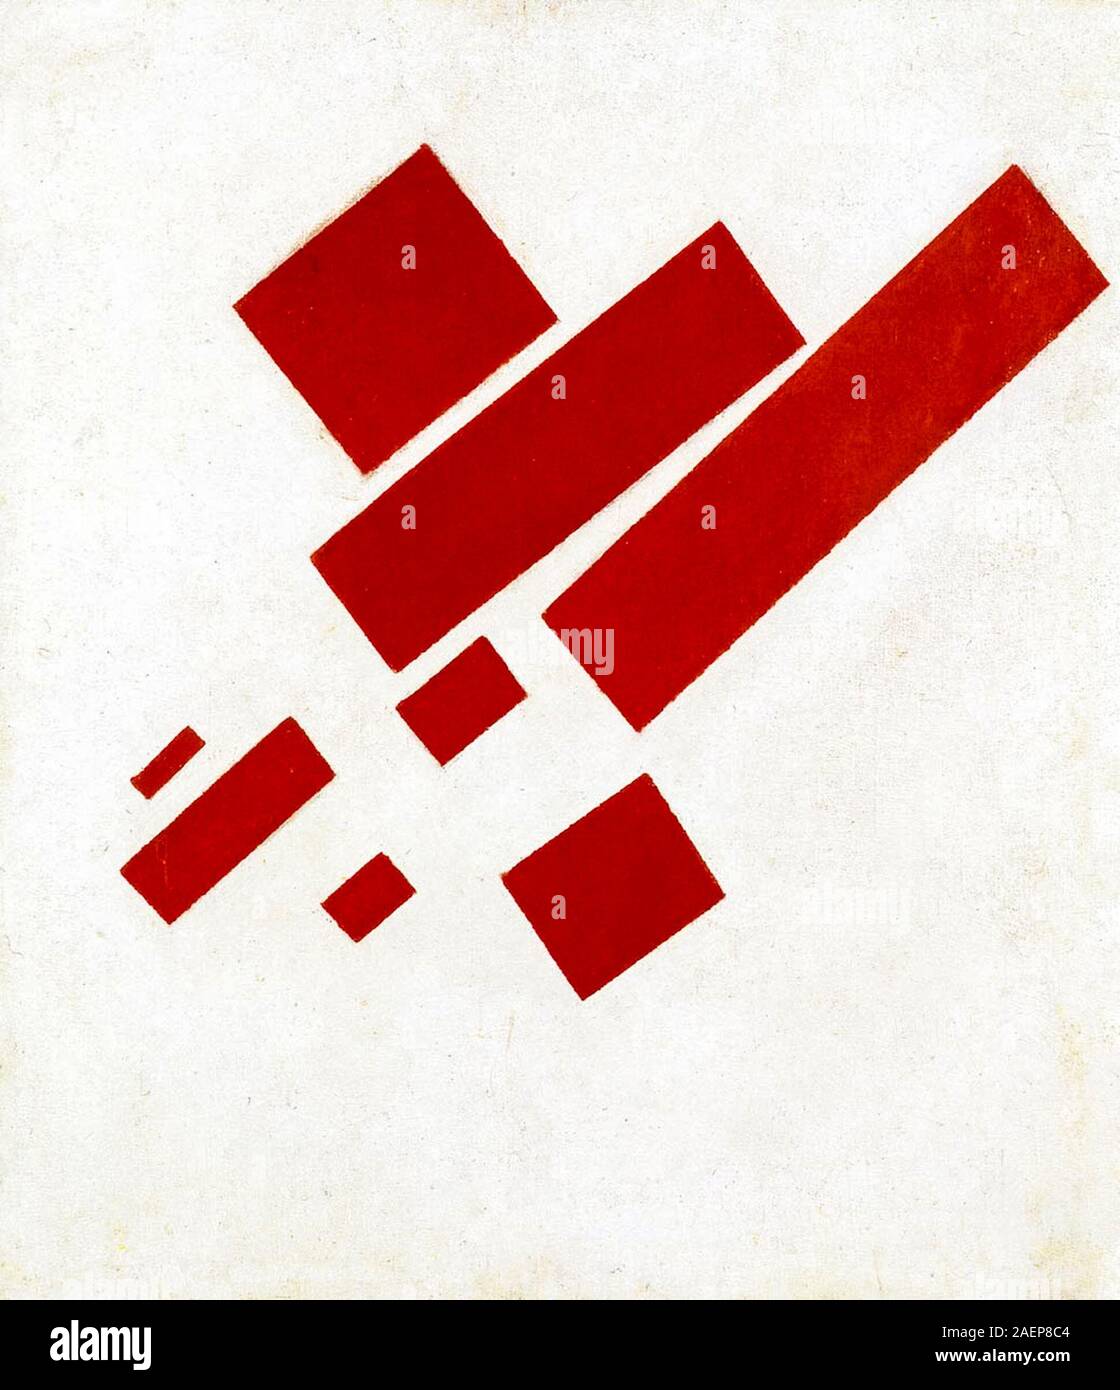 Kazimir Malevich, Suprematist Composition, (with eight red rectangles), abstract painting, 1915 Stock Photo